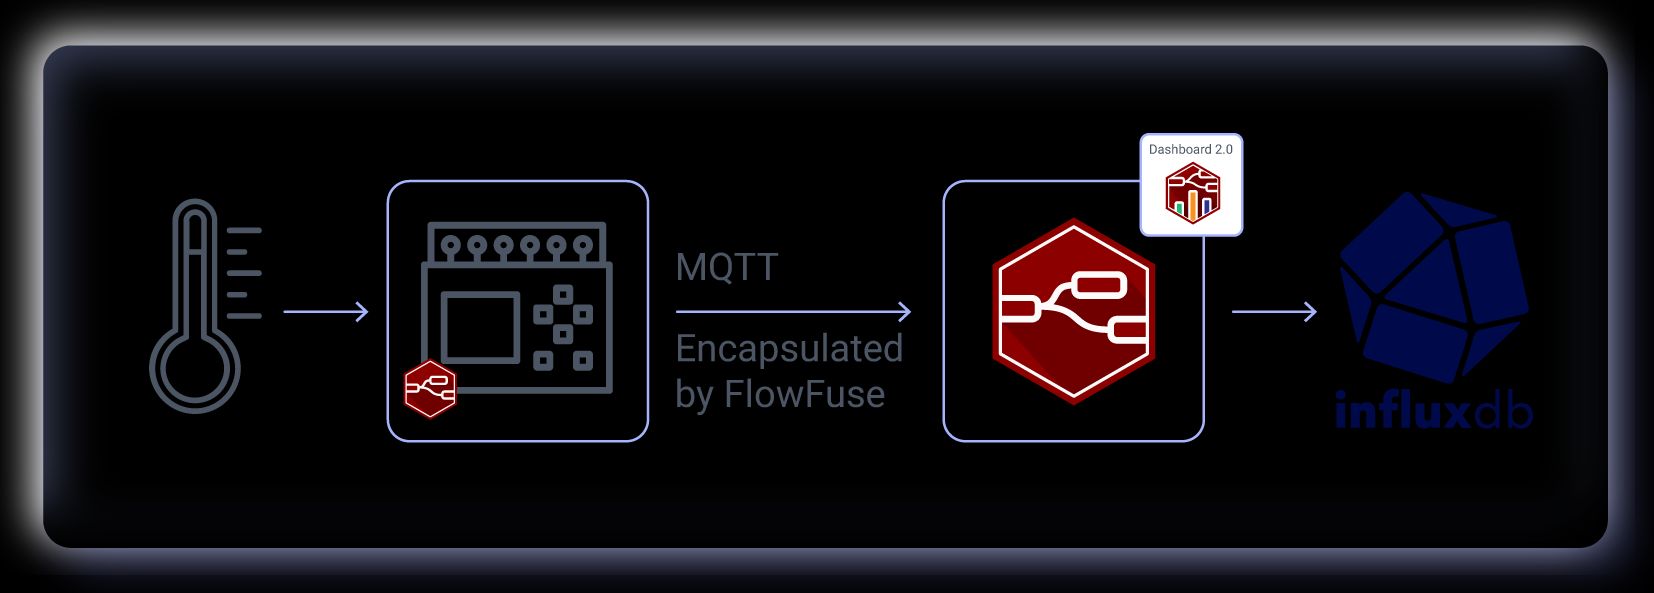 "Screenshot showing the flow of data: Sensor > Node-RED(FlowFuse Device Agent) > MQTT Encapsulated by FlowFuse > Node-RED(FlowFuse Platform) > InfluxDB"